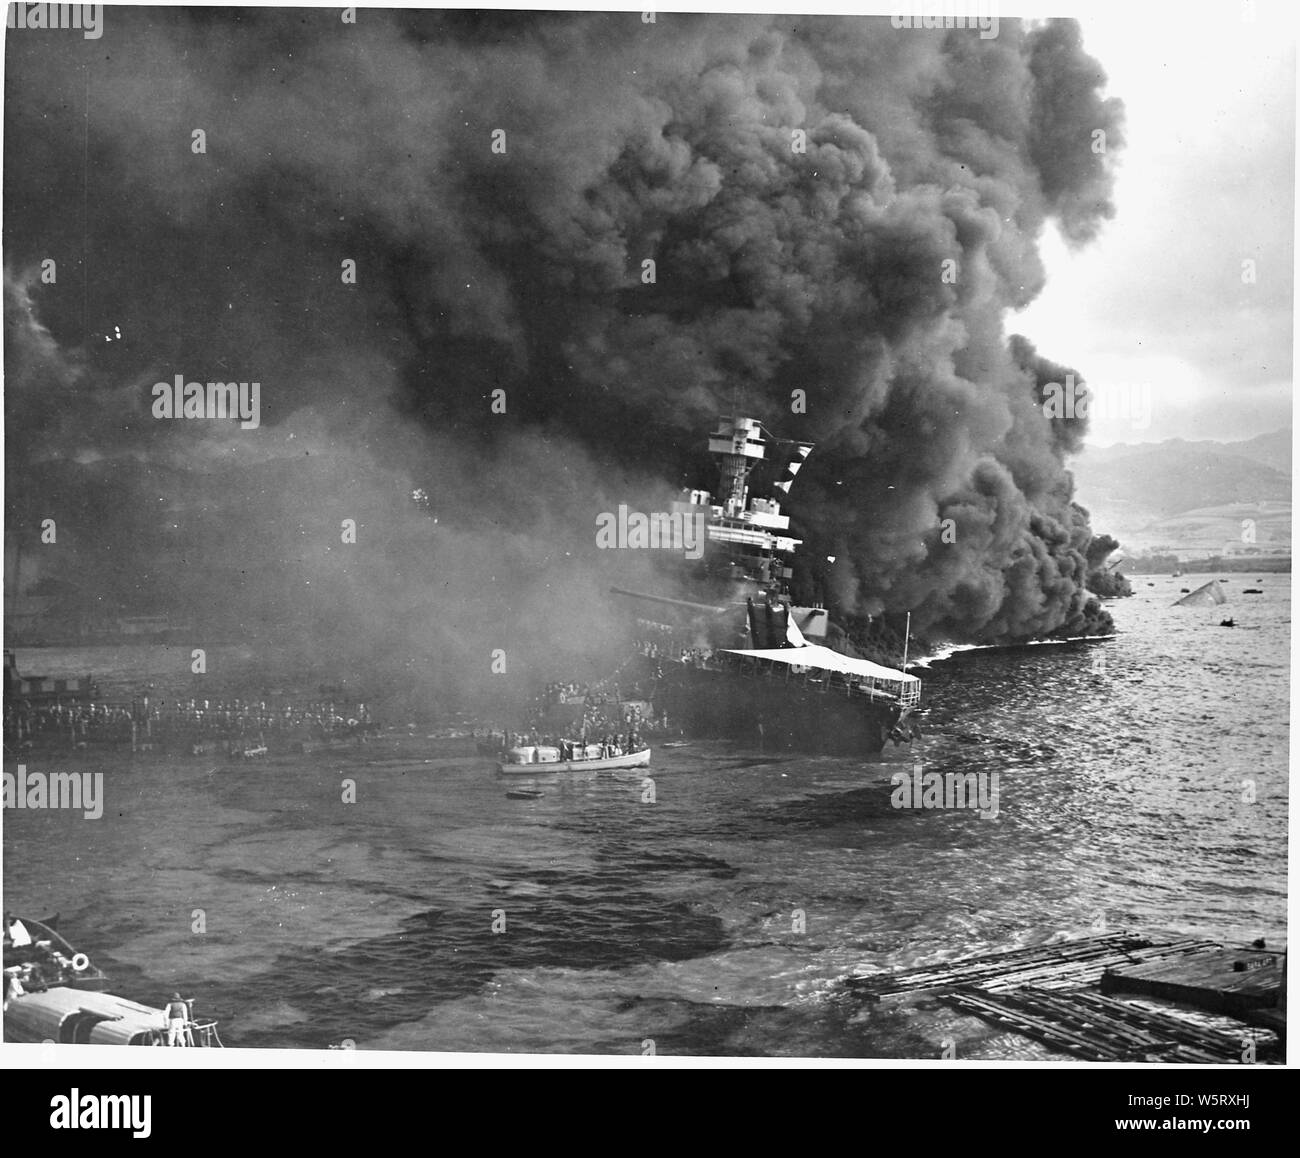 Naval photograph documenting the Japanese attack on Pearl Harbor, Hawaii which initiated US participation in World War II. Navy's caption: Abandoning ship aboard the USS CALIFORNIA after the ship had been set afire and started to sink from being attacked by the Japanese in their attack on Pearl Harbor on Dec. 7, 1941.; Scope and content:  This photograph was originally taken by a Naval photographer immediately after the Japanese attack on Pearl Harbor, but came to be filed in a writ of application for habeas corpus case (number 298) tried in the US District Court, District of Hawaii in 1944. T Stock Photo